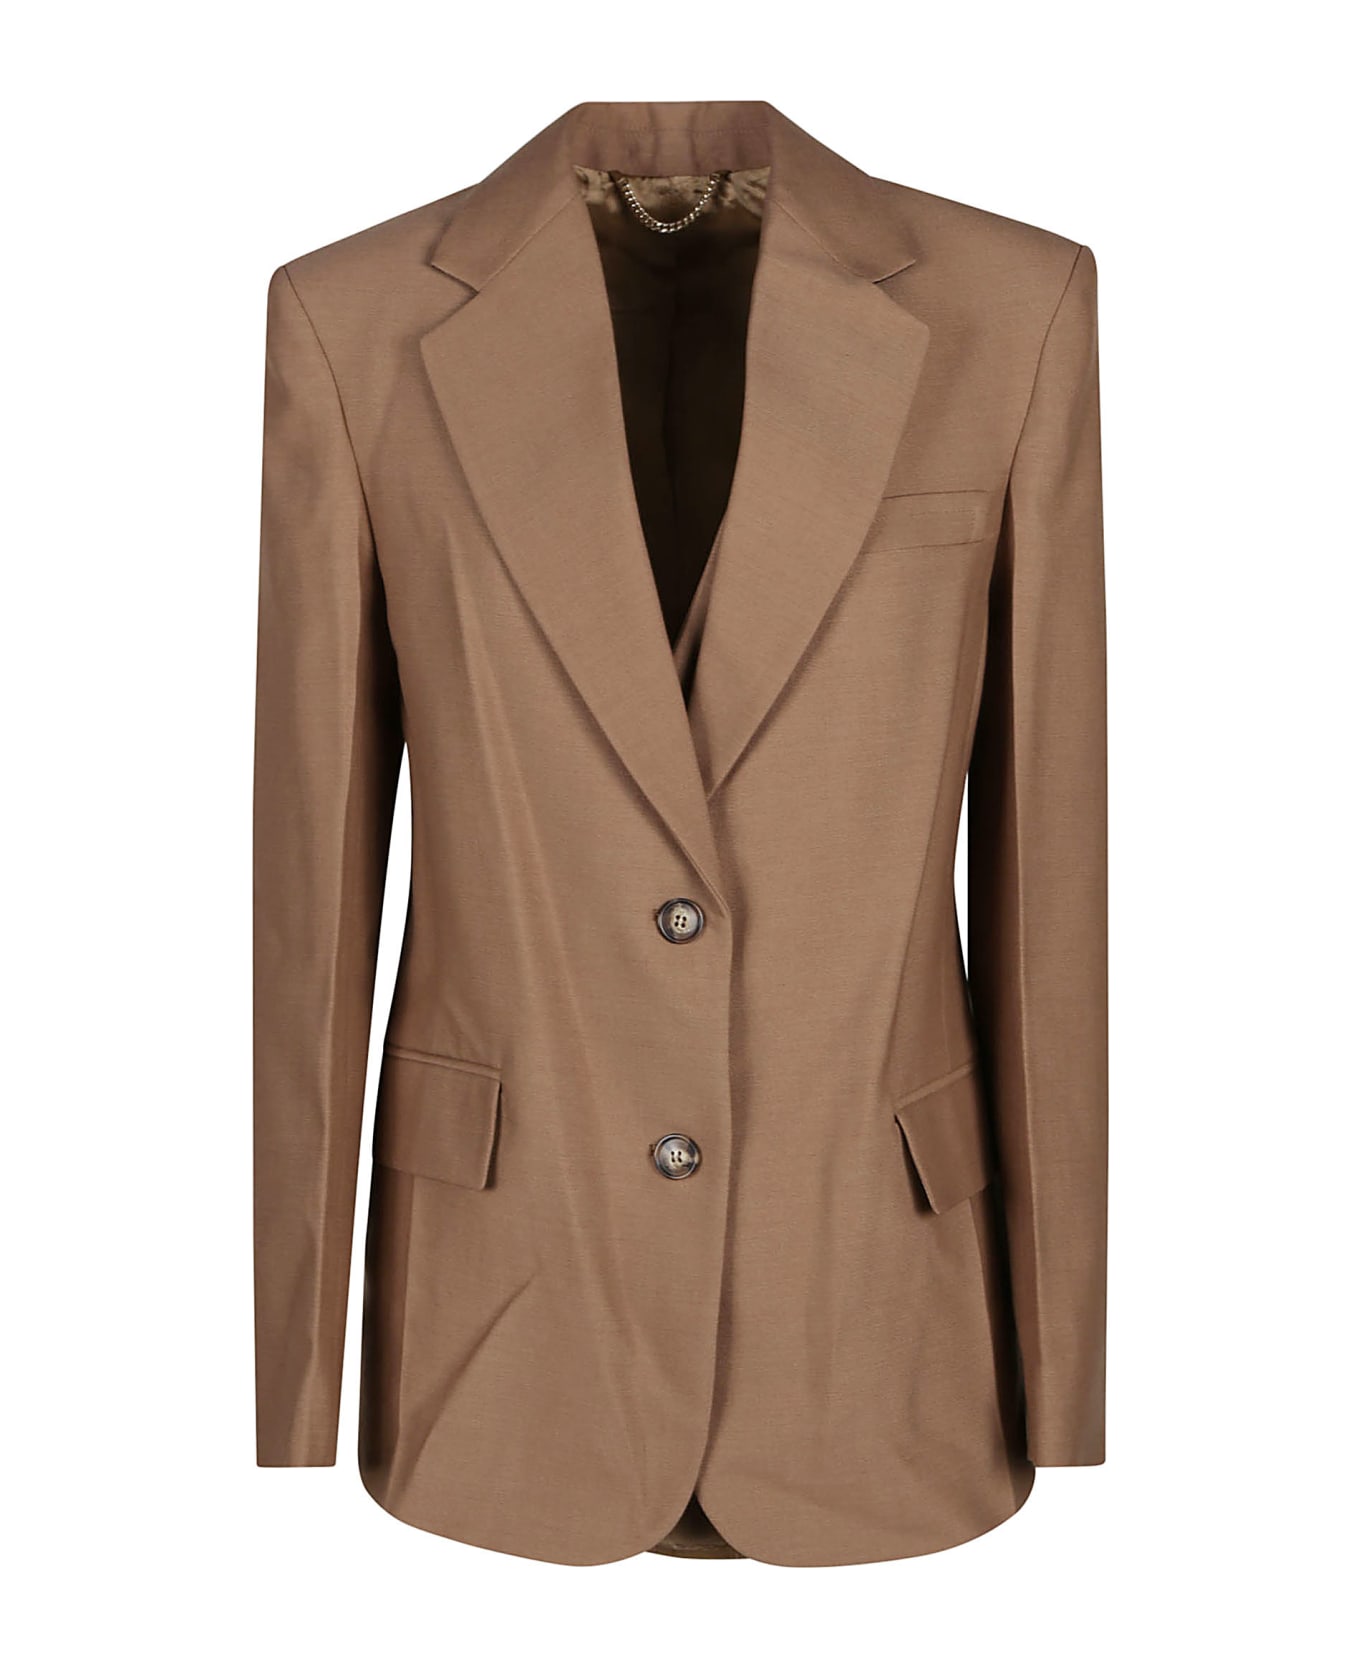 Victoria Beckham Asymetric Double Layer Jacket - Fawn